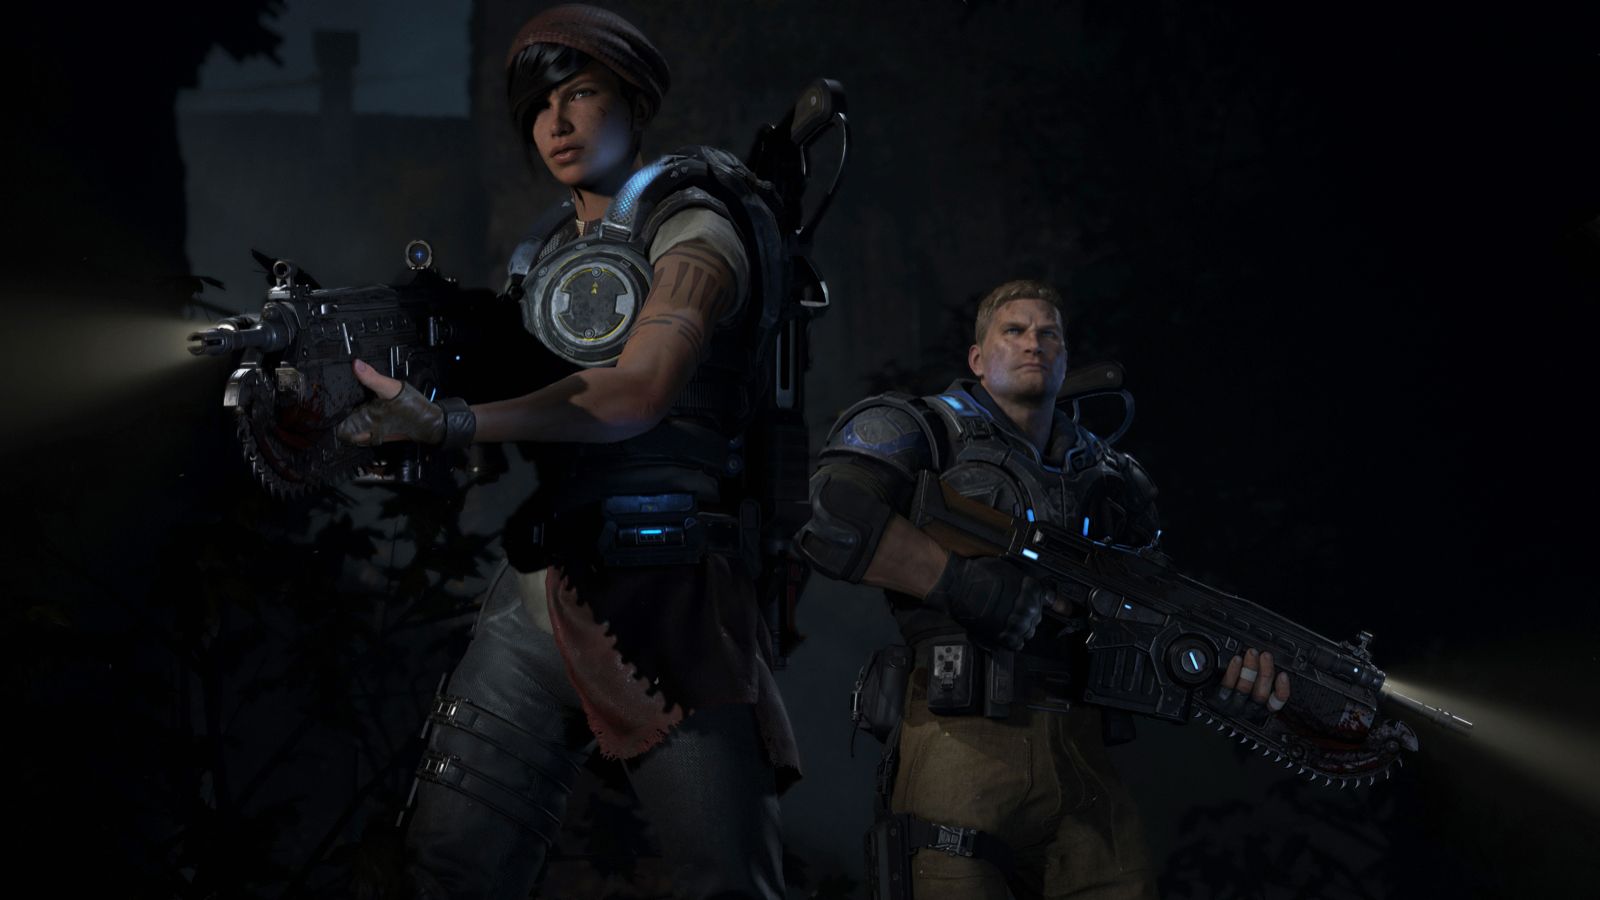 microsoft at e3 gears 4 coming 2016 and refreshed gears of war in 1080p image 1